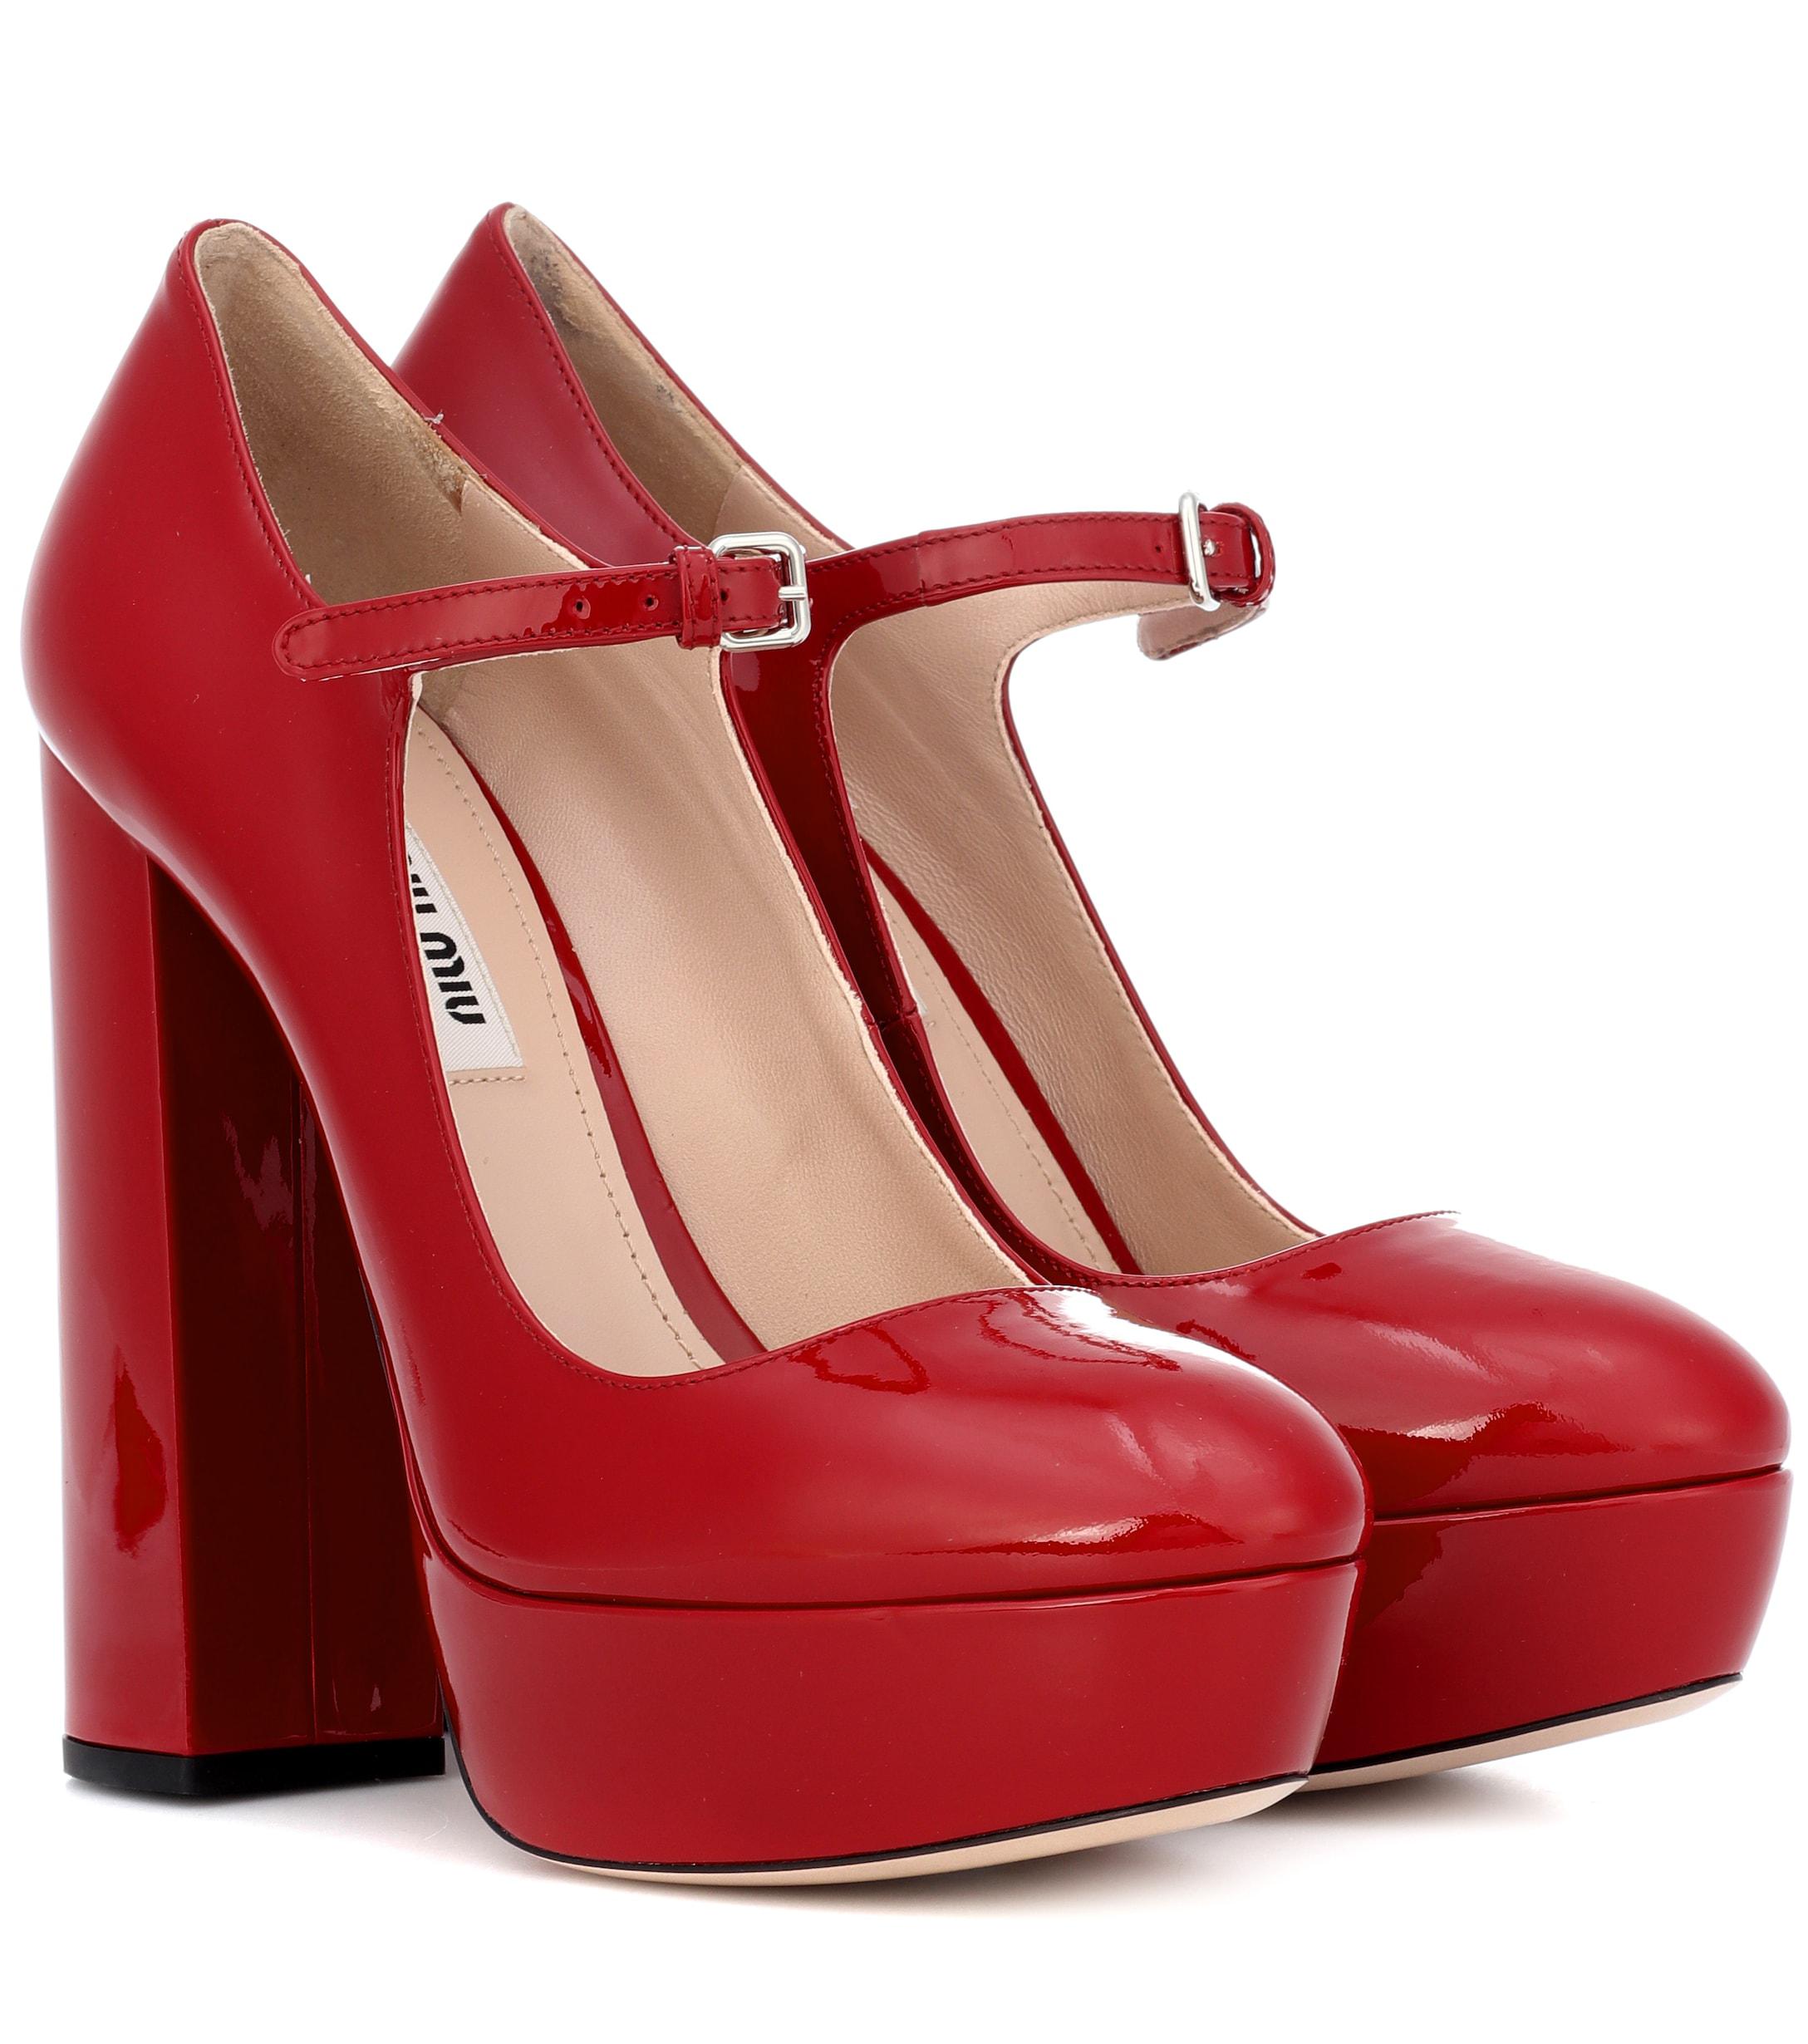 Miu Miu Mary Jane Patent Leather Pumps in Red | Lyst